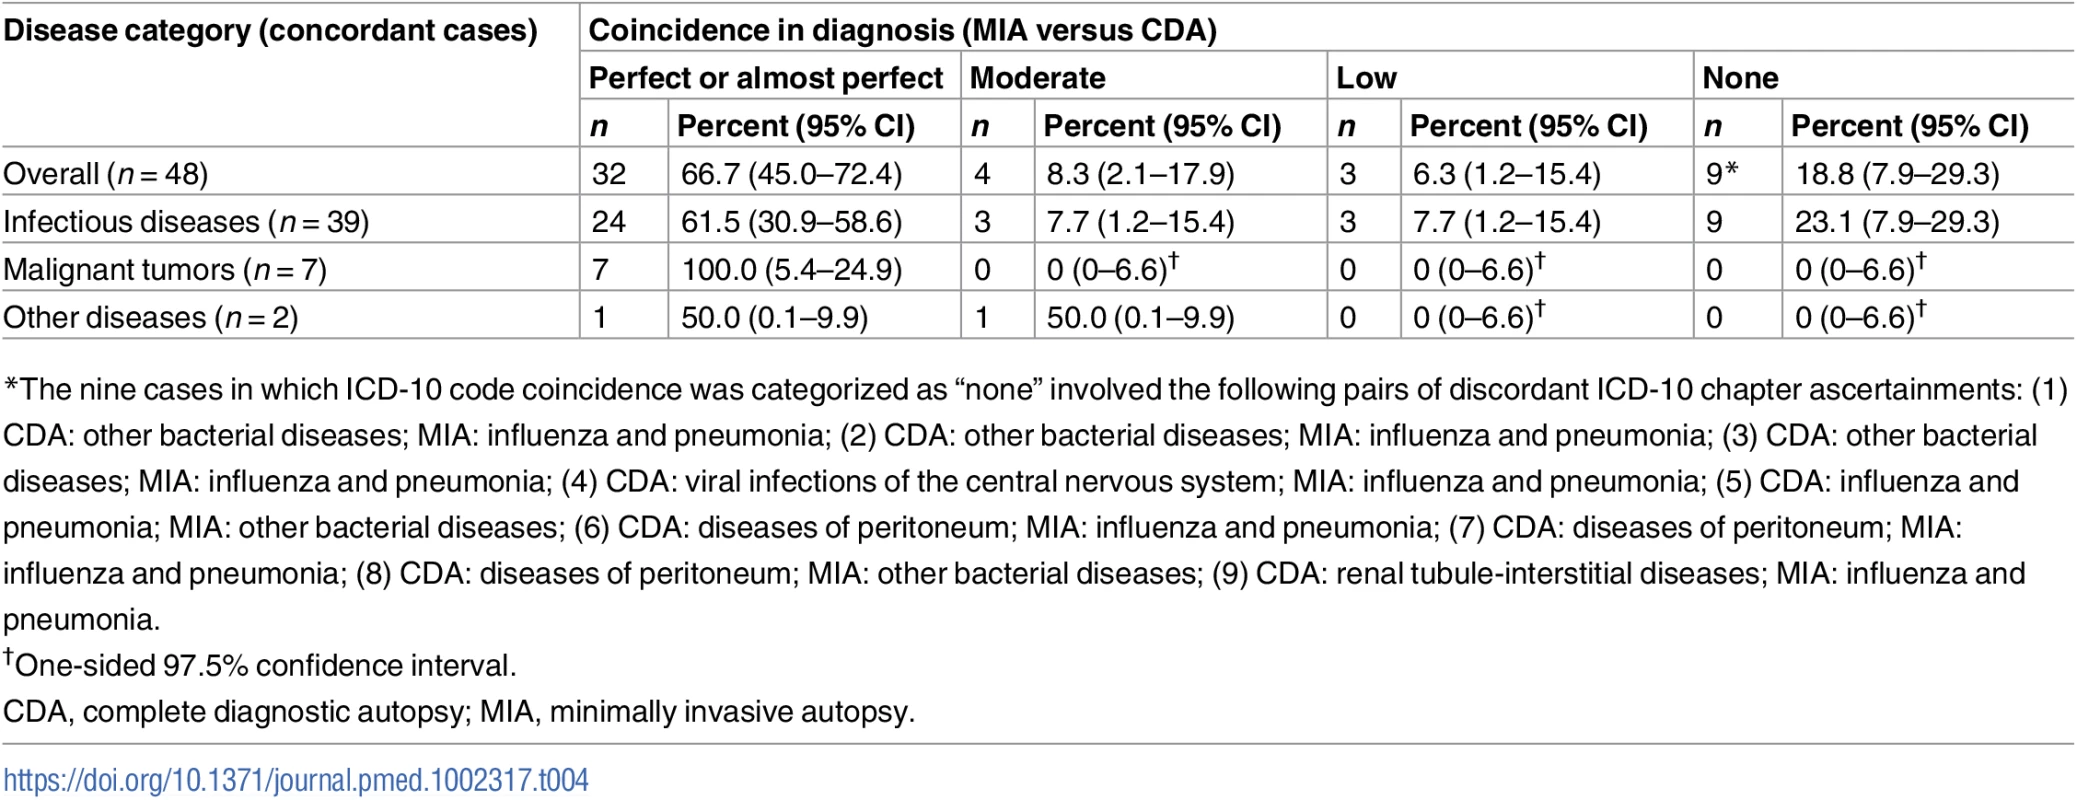 Summary of ICD-10 code coincidence for the 48 cases for which disease categorization did not show discrepancy between the minimally invasive autopsy and the complete diagnostic autopsy diagnosis.